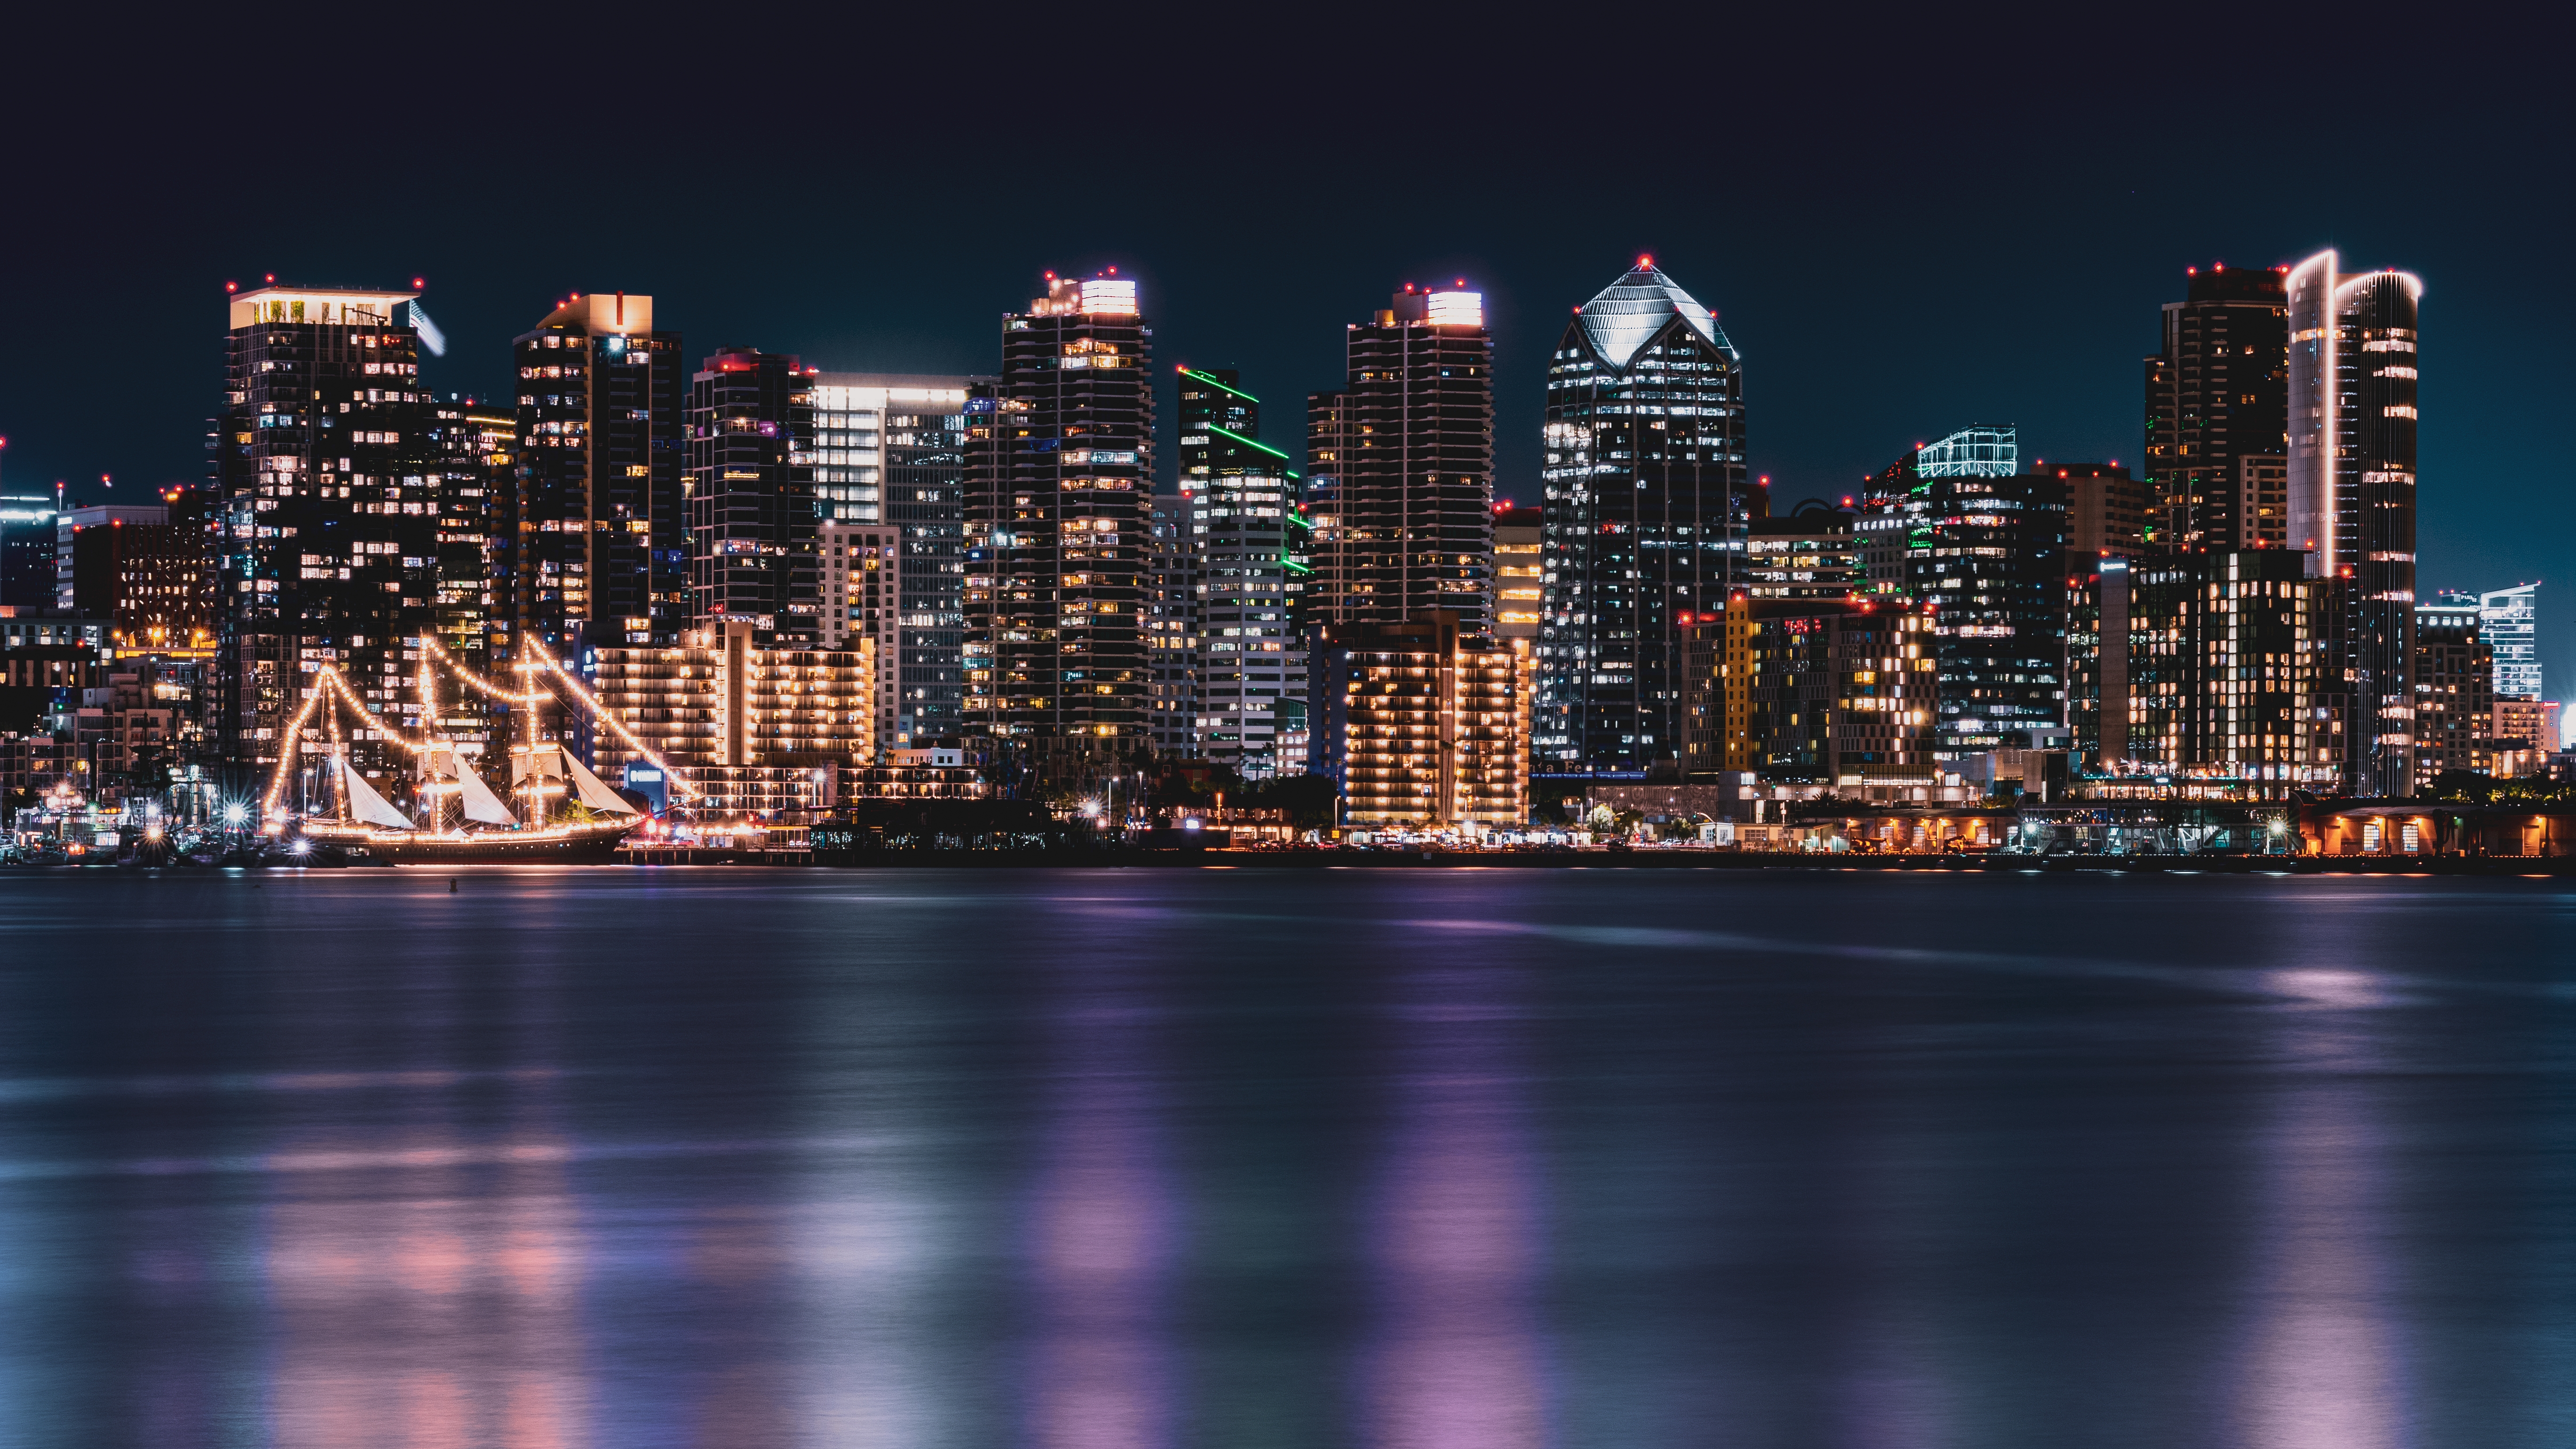 HD wallpaper, Cityscape, Reflection, Night Time, Skyscrapers, City Lights, 5K, San Diego City, Body Of Water, Long Exposure, Skyline